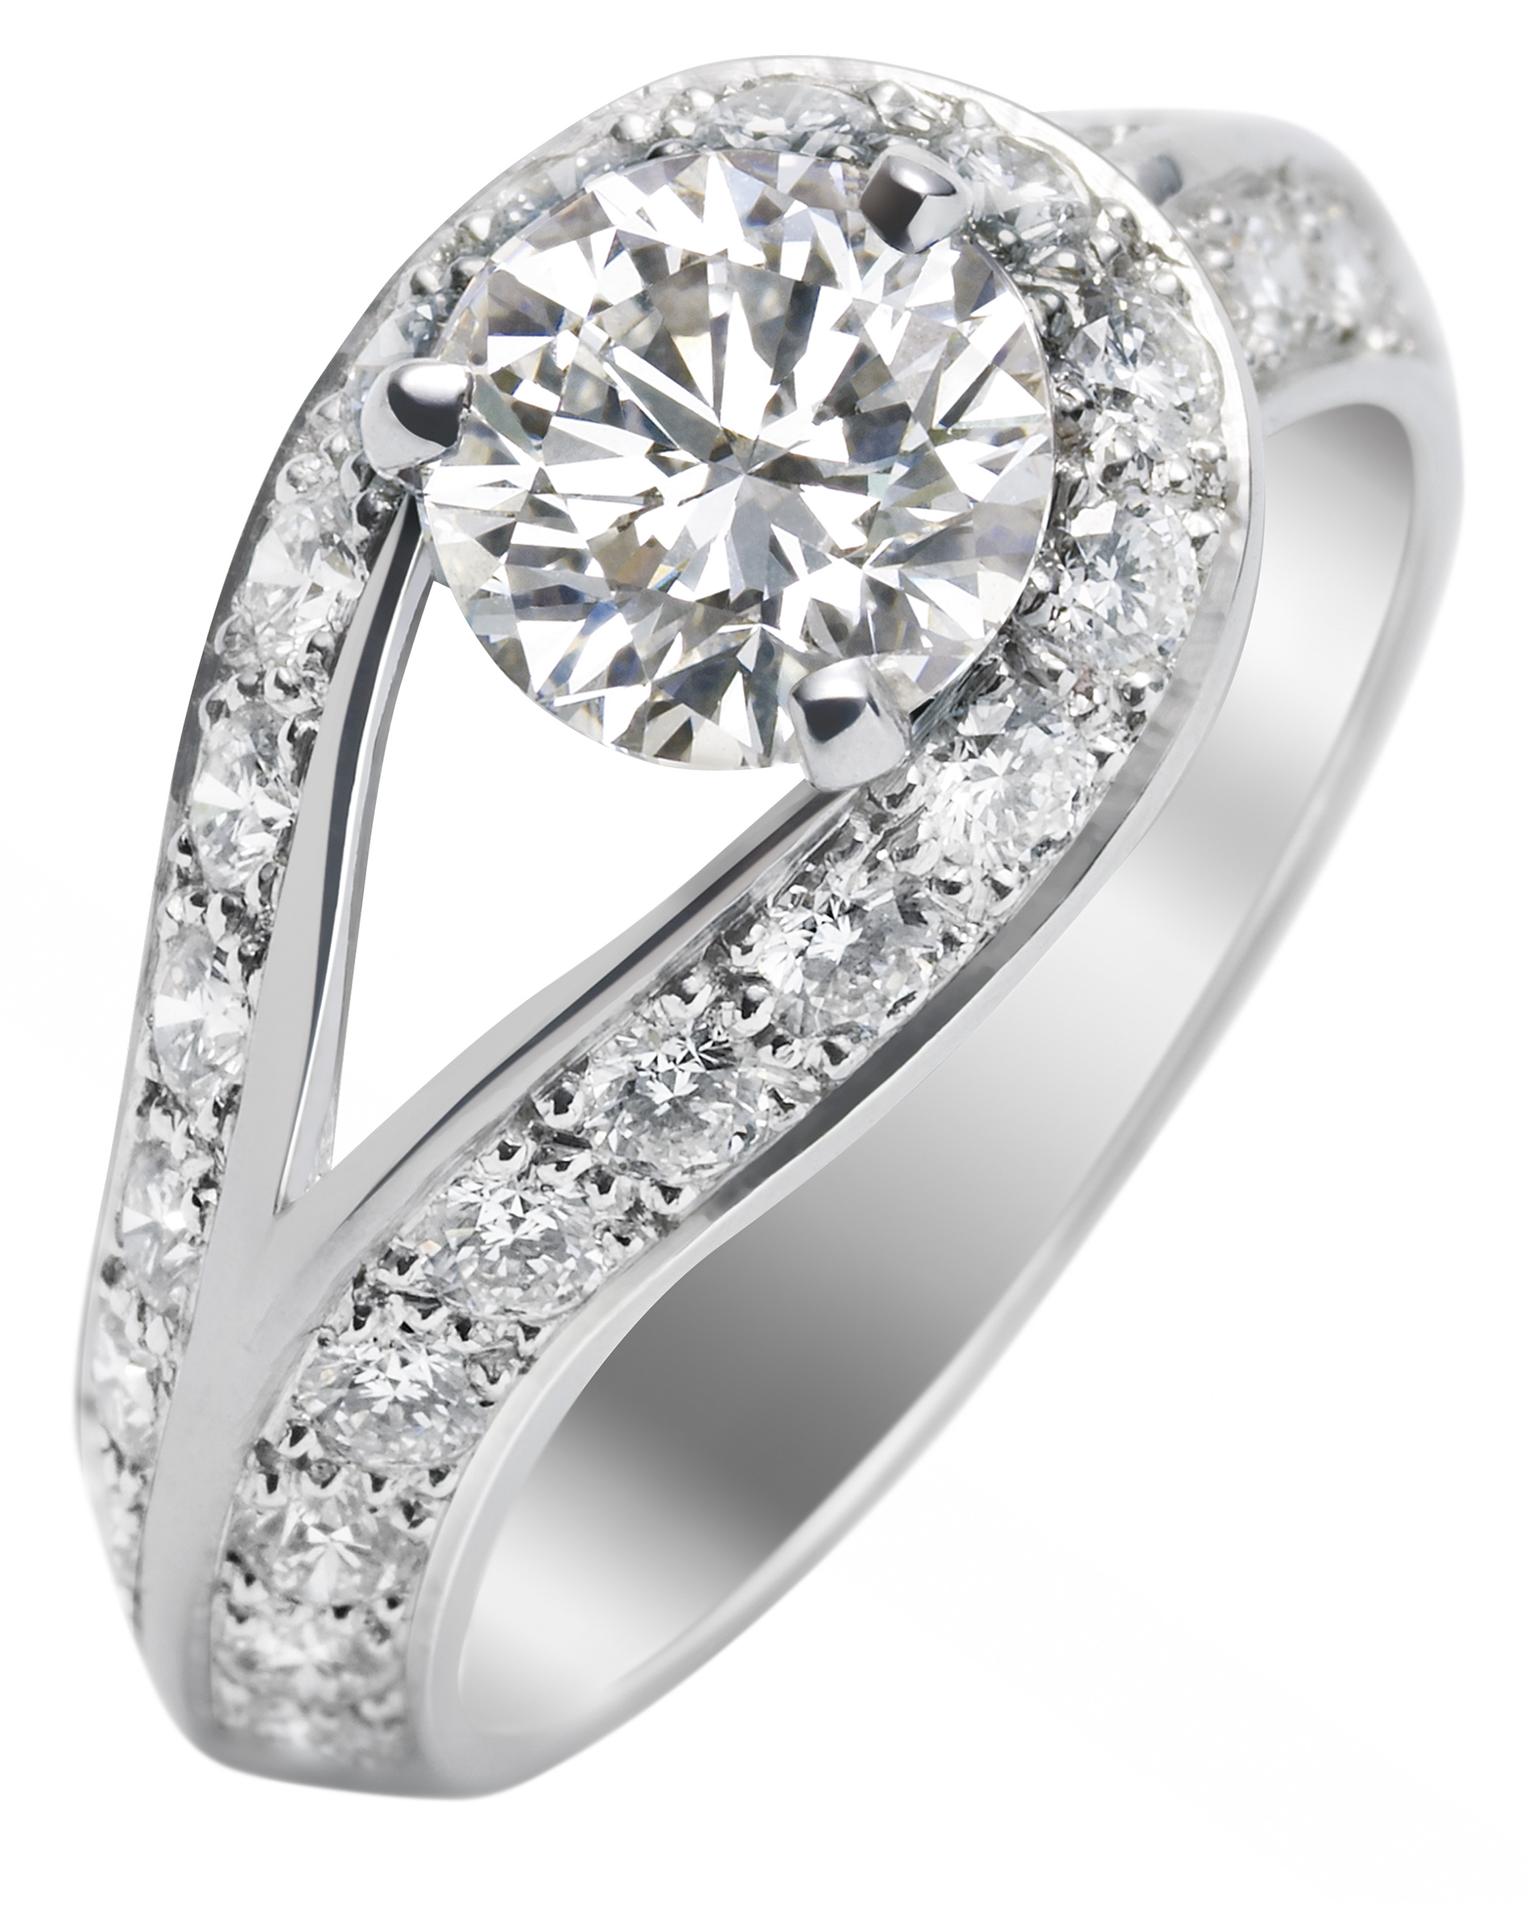 Van Cleef & Arpels Solitaire Couture engagement ring_20130619_Zoom